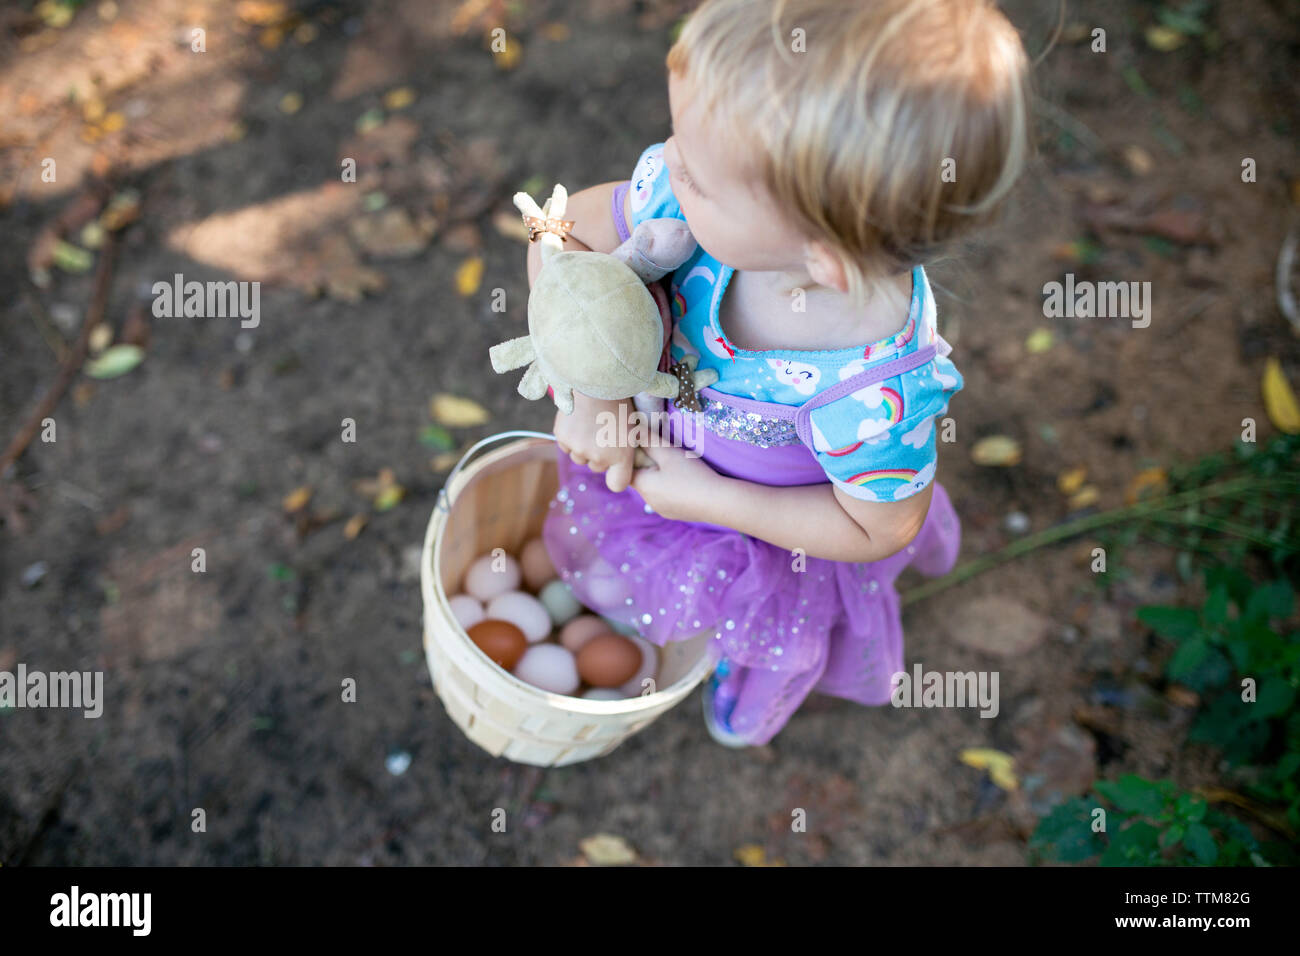 Toddler girl looking away holding baby doll and basket of eggs Stock Photo